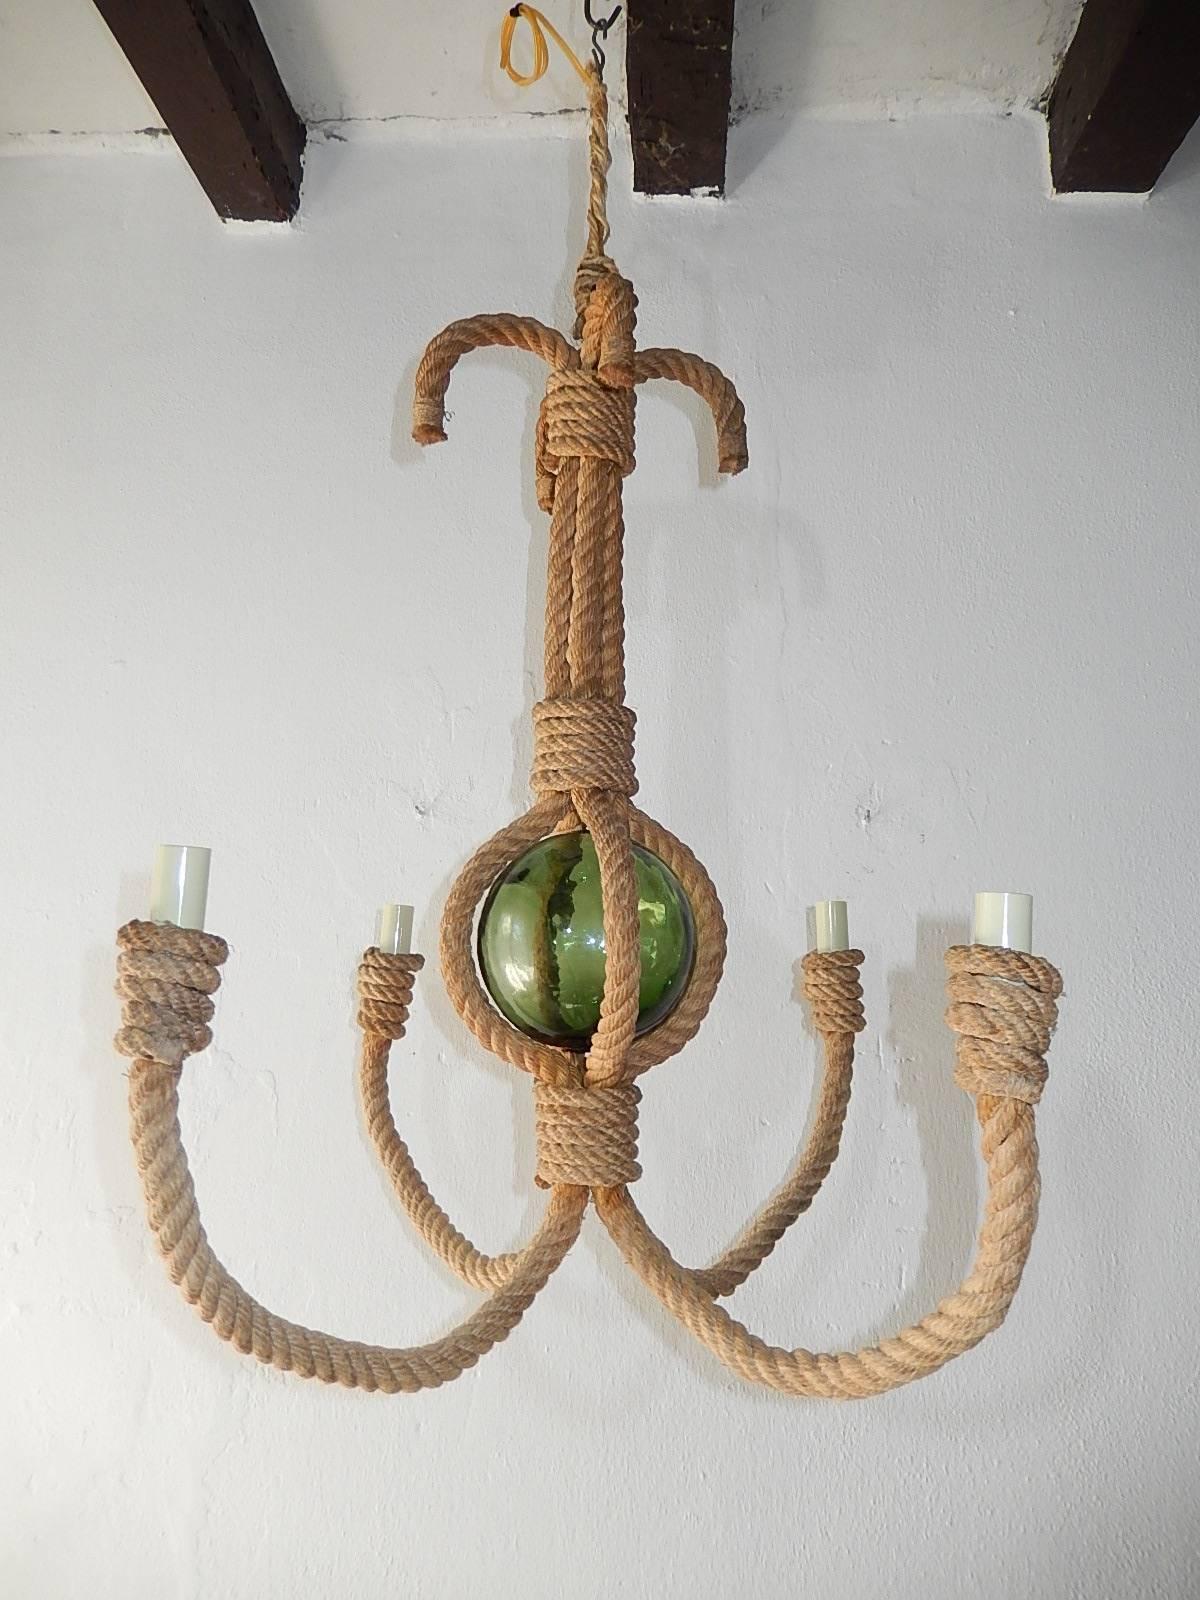 French Audoux Minet Rope Chandelier with Green Glass Ball